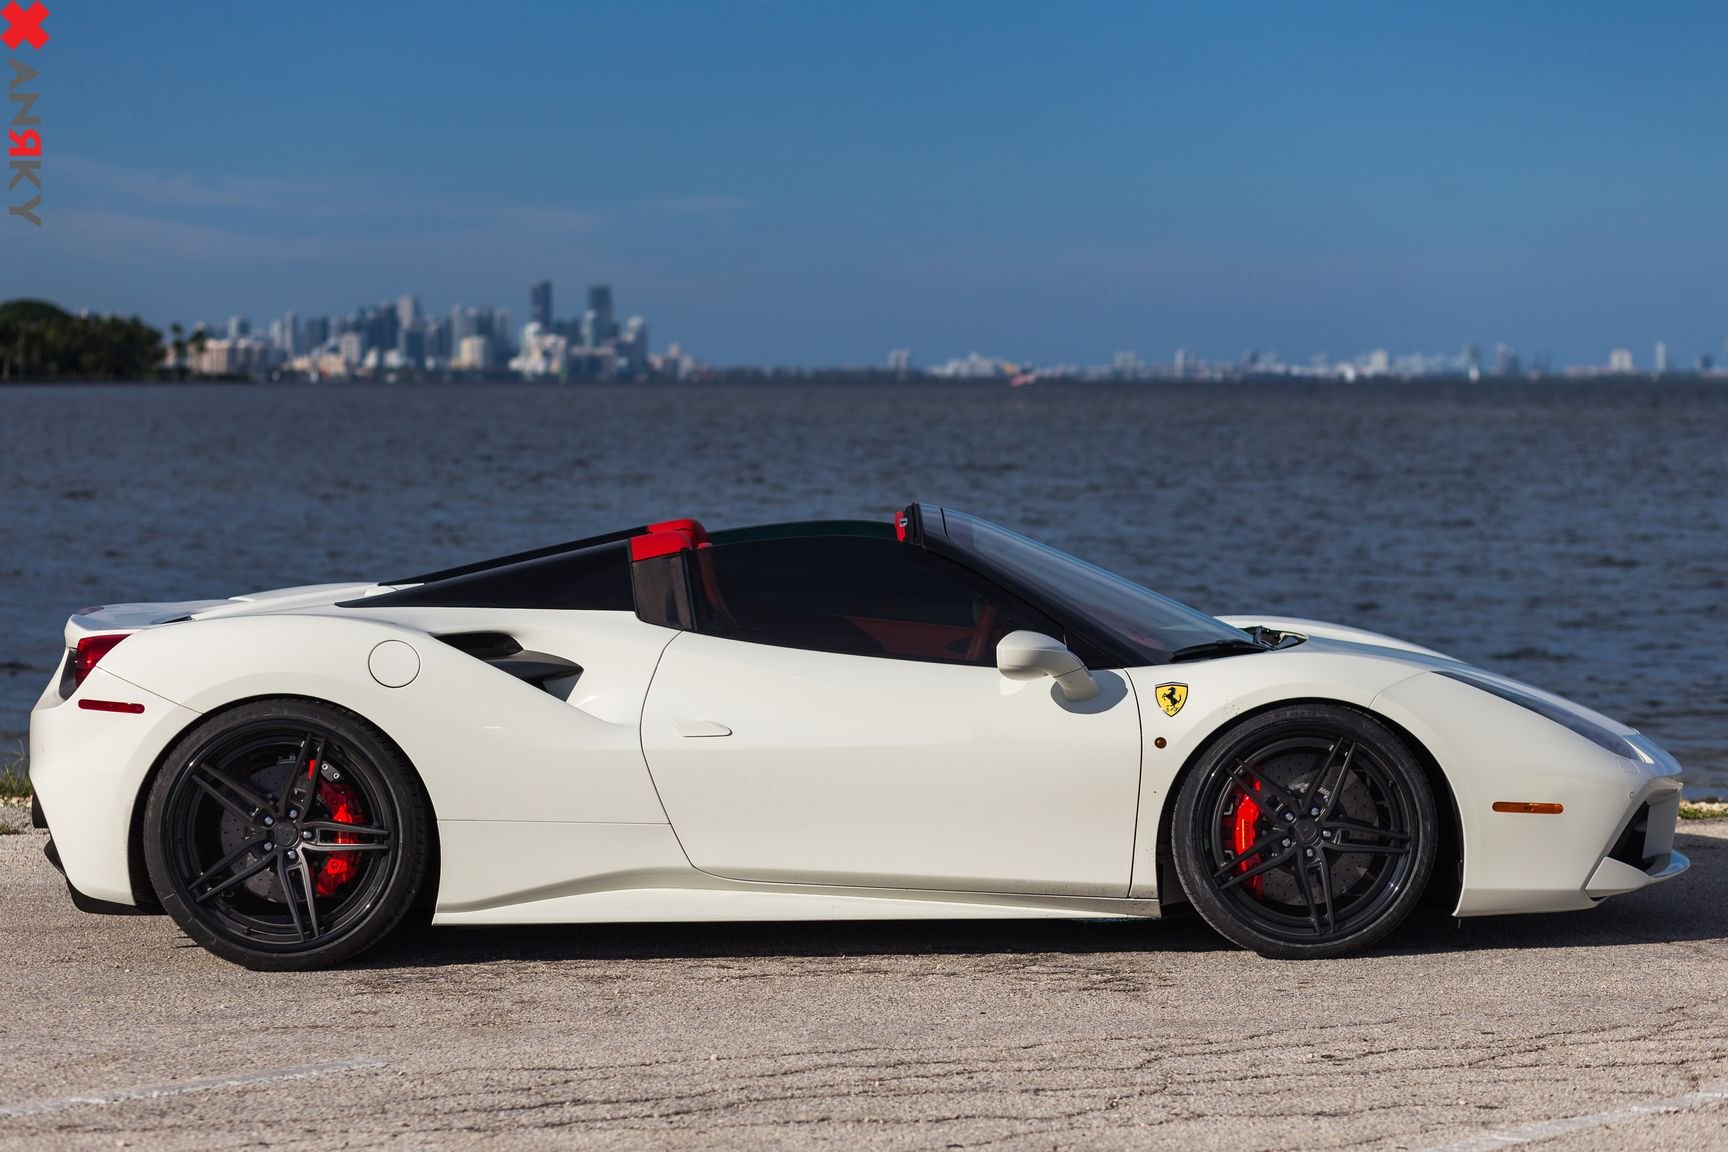 Aftermarket Side Scoops on White Convertible Ferrari 488 - Photo by Anrky Wheels